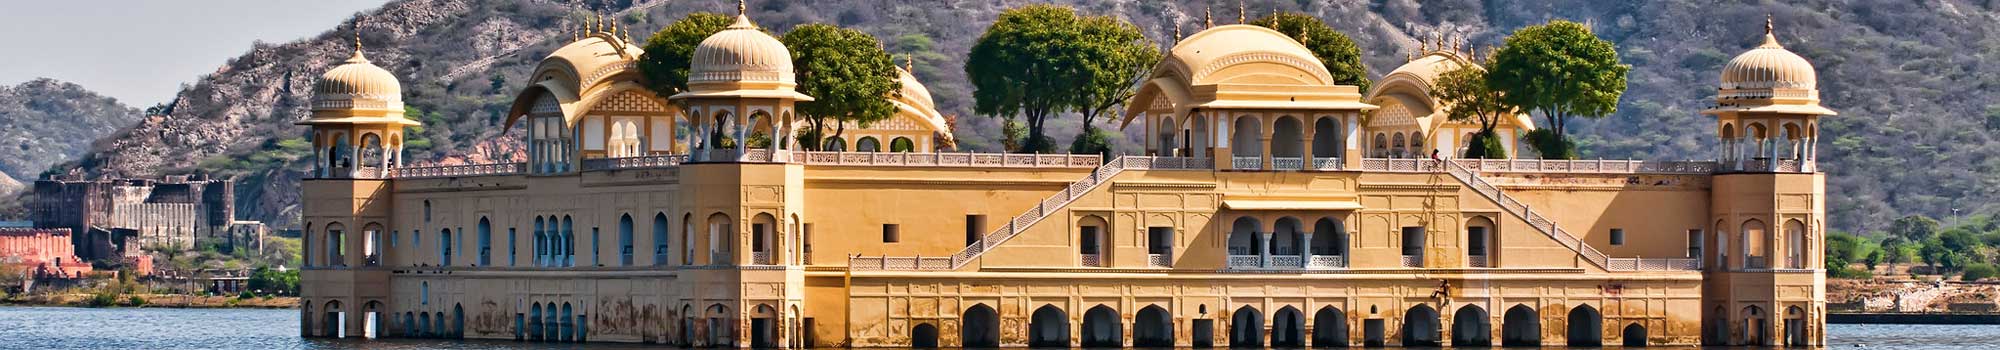 Jaipur tourism|Best places to visit in Jaipur & things to do